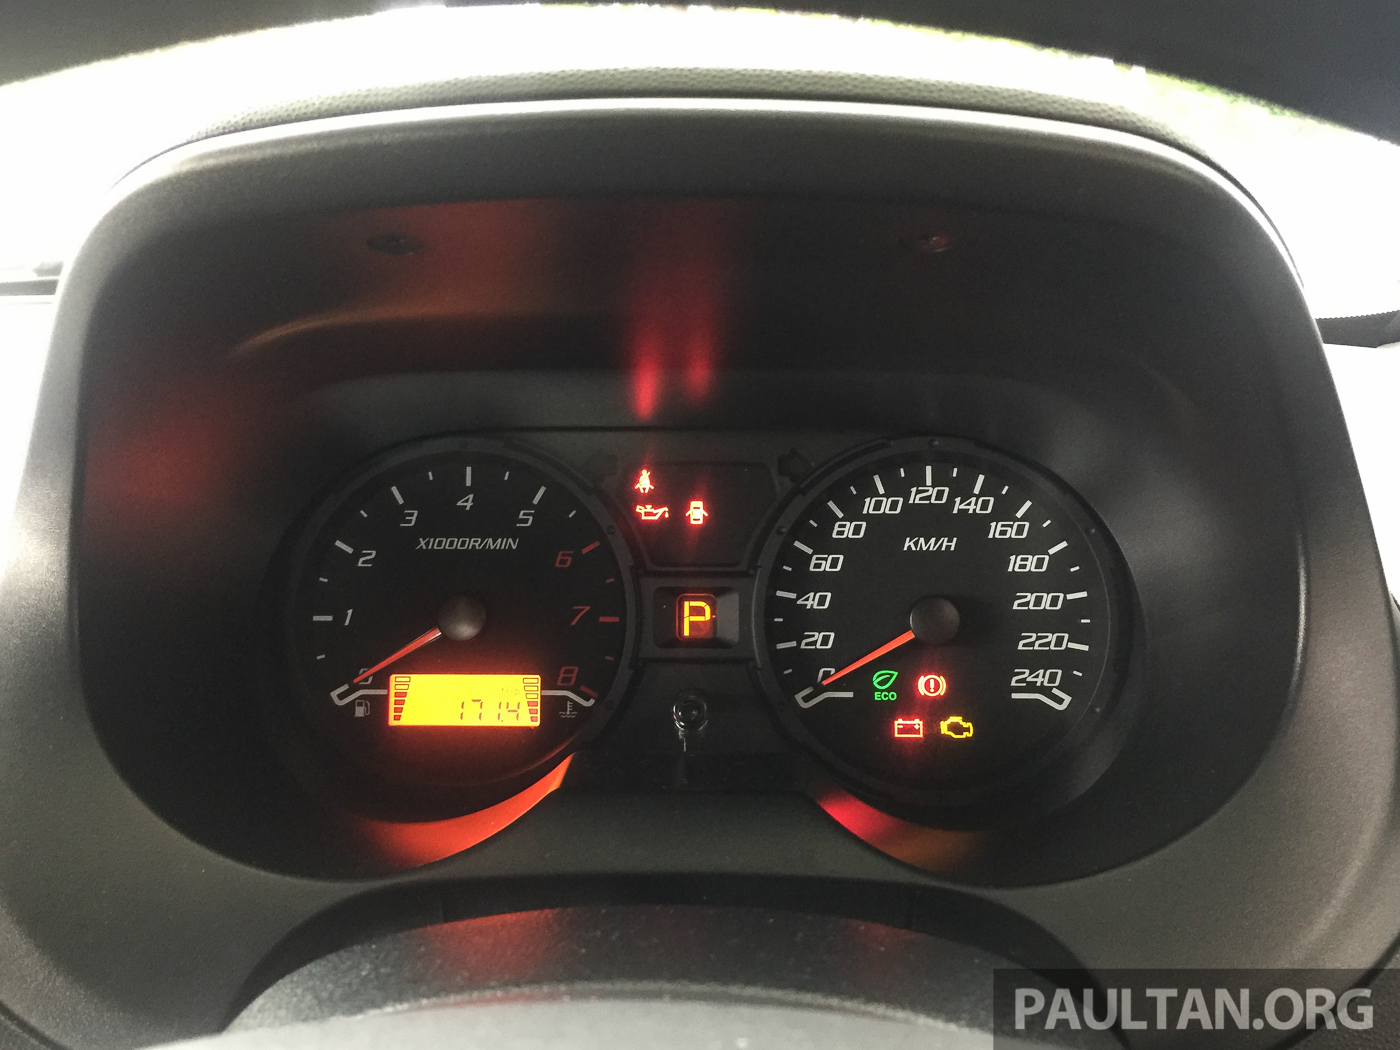 RON 95 vs RON 97 fuel test with the Proton Saga - is the ...